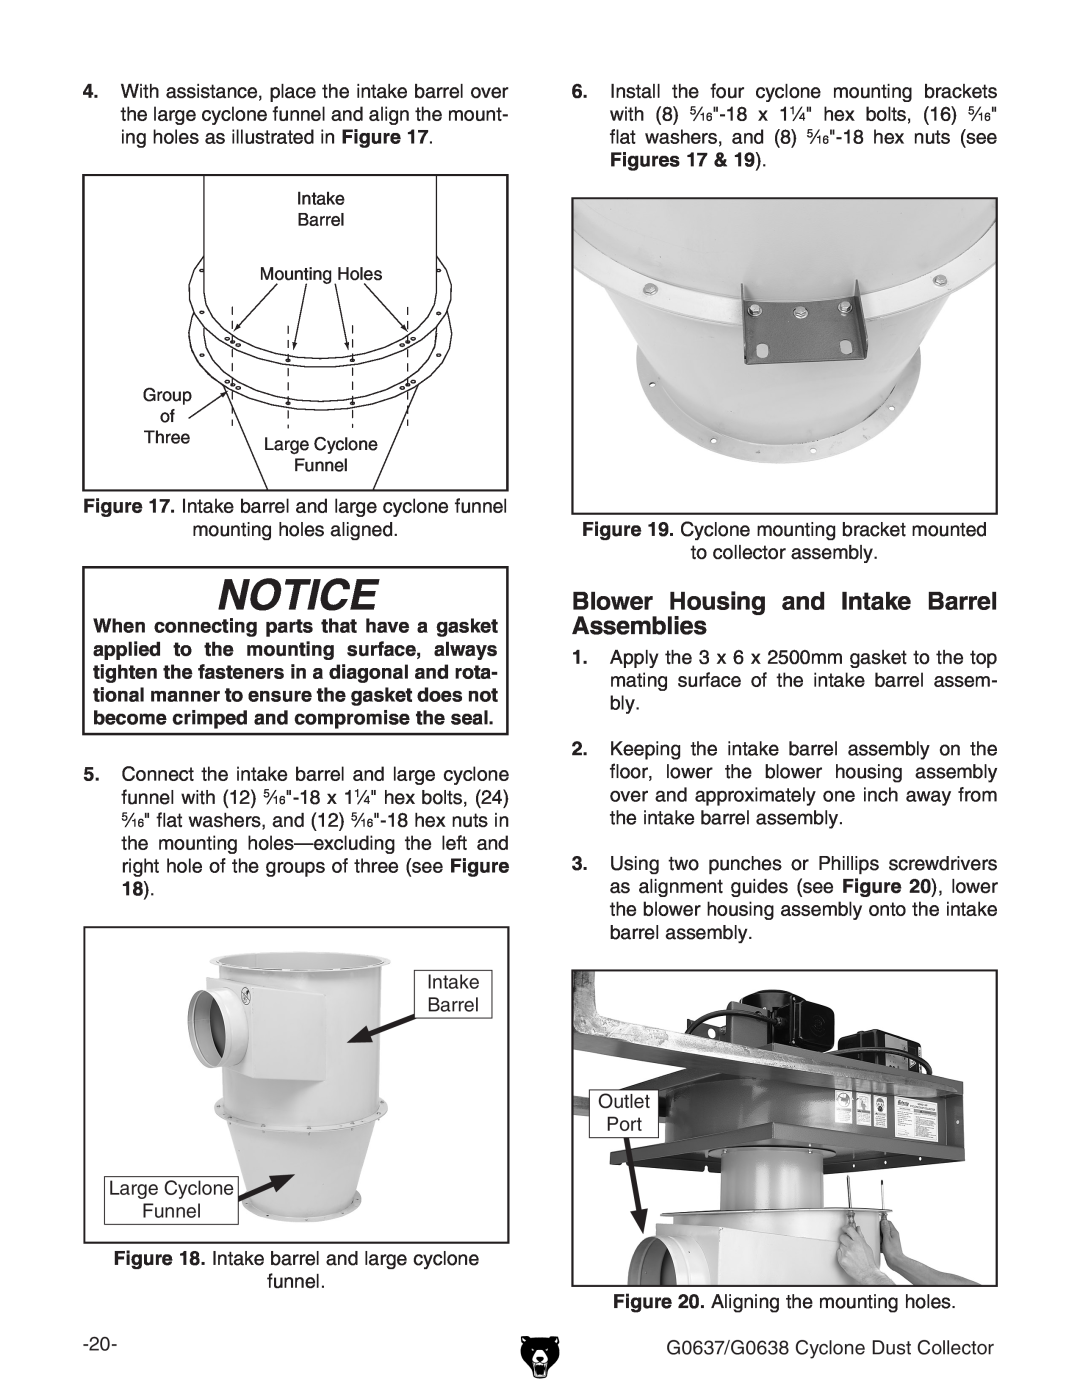 Grizzly G0637, G0638 owner manual Blower Housing and Intake Barrel Assemblies, Notice 